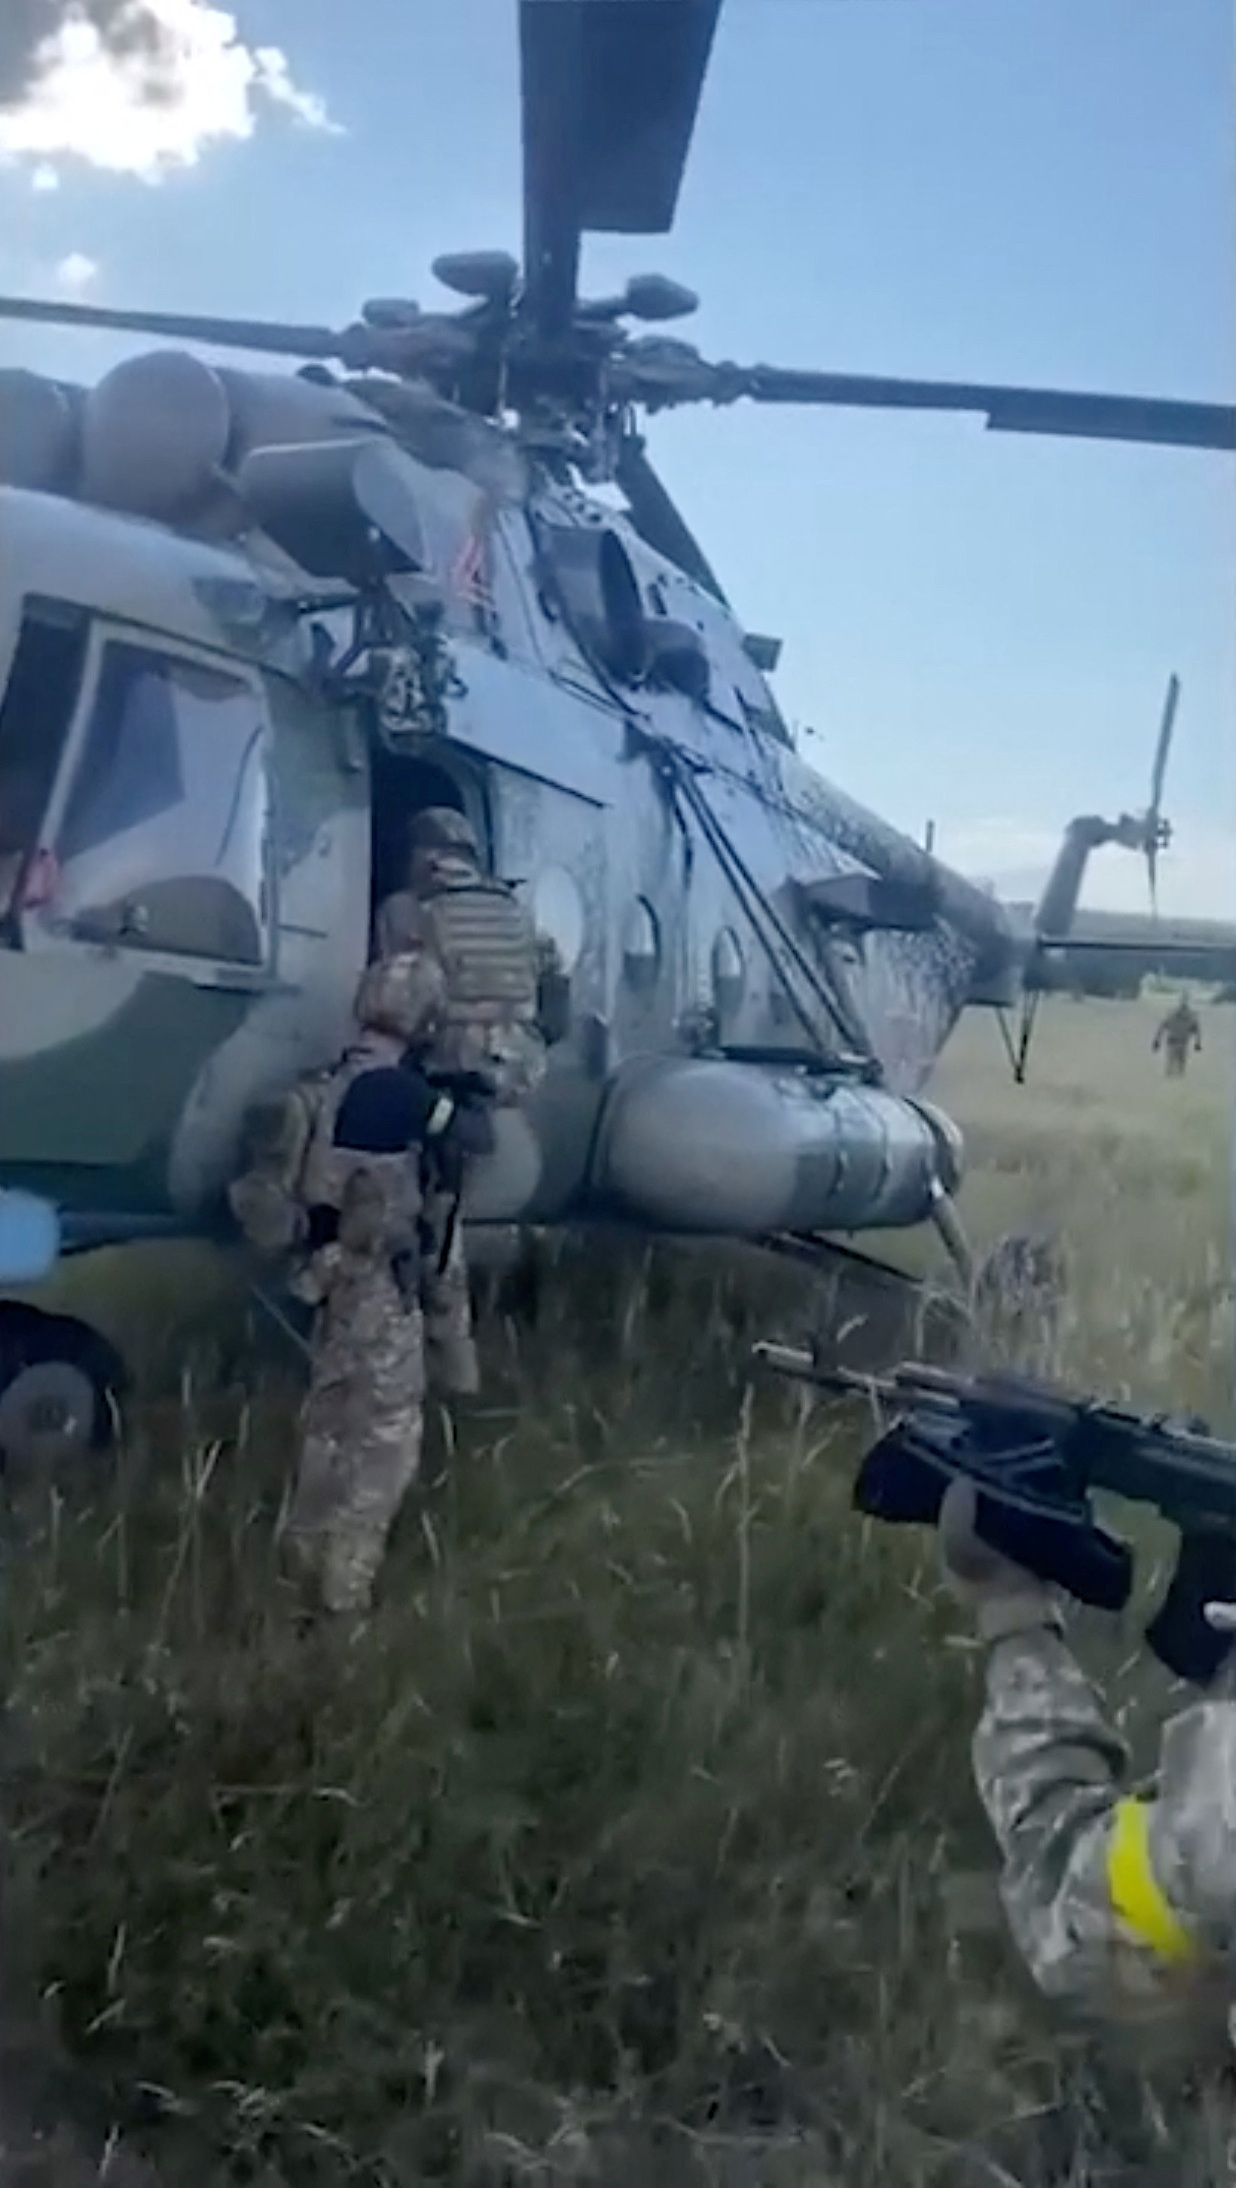 Ukraine intelligence officers inspect the Russian chopper which they say was stolen by Maxim Kuzminov